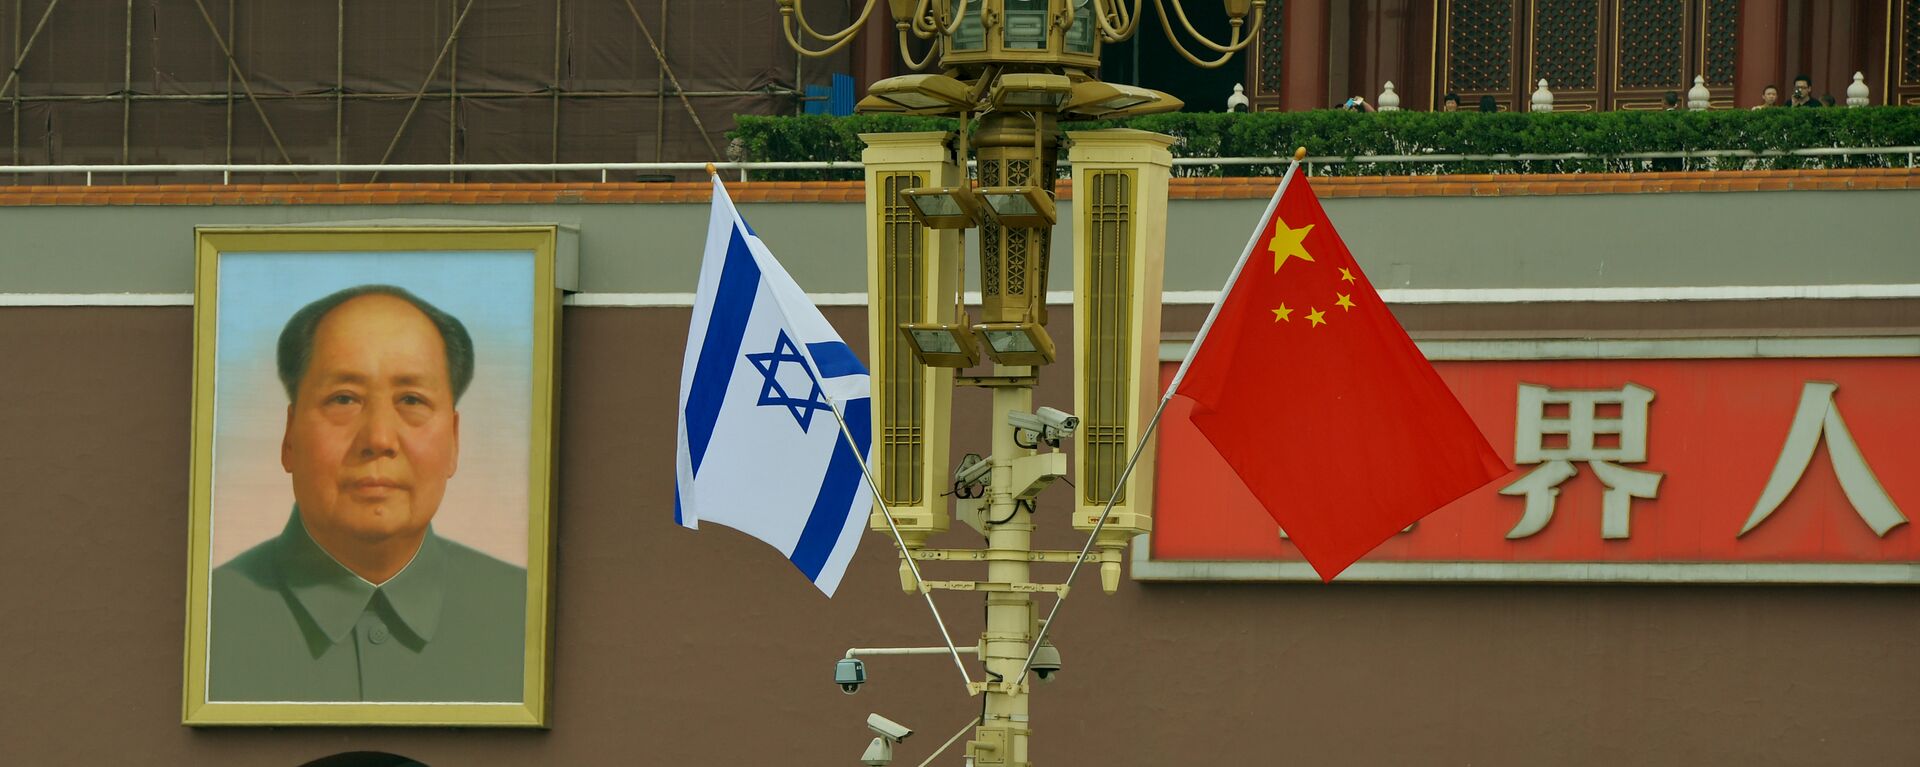 The Israeli and Chinese flags fly beside the portrait of Mao Zedong at Tiananmen Gate in Beijing (File) - Sputnik International, 1920, 08.03.2020